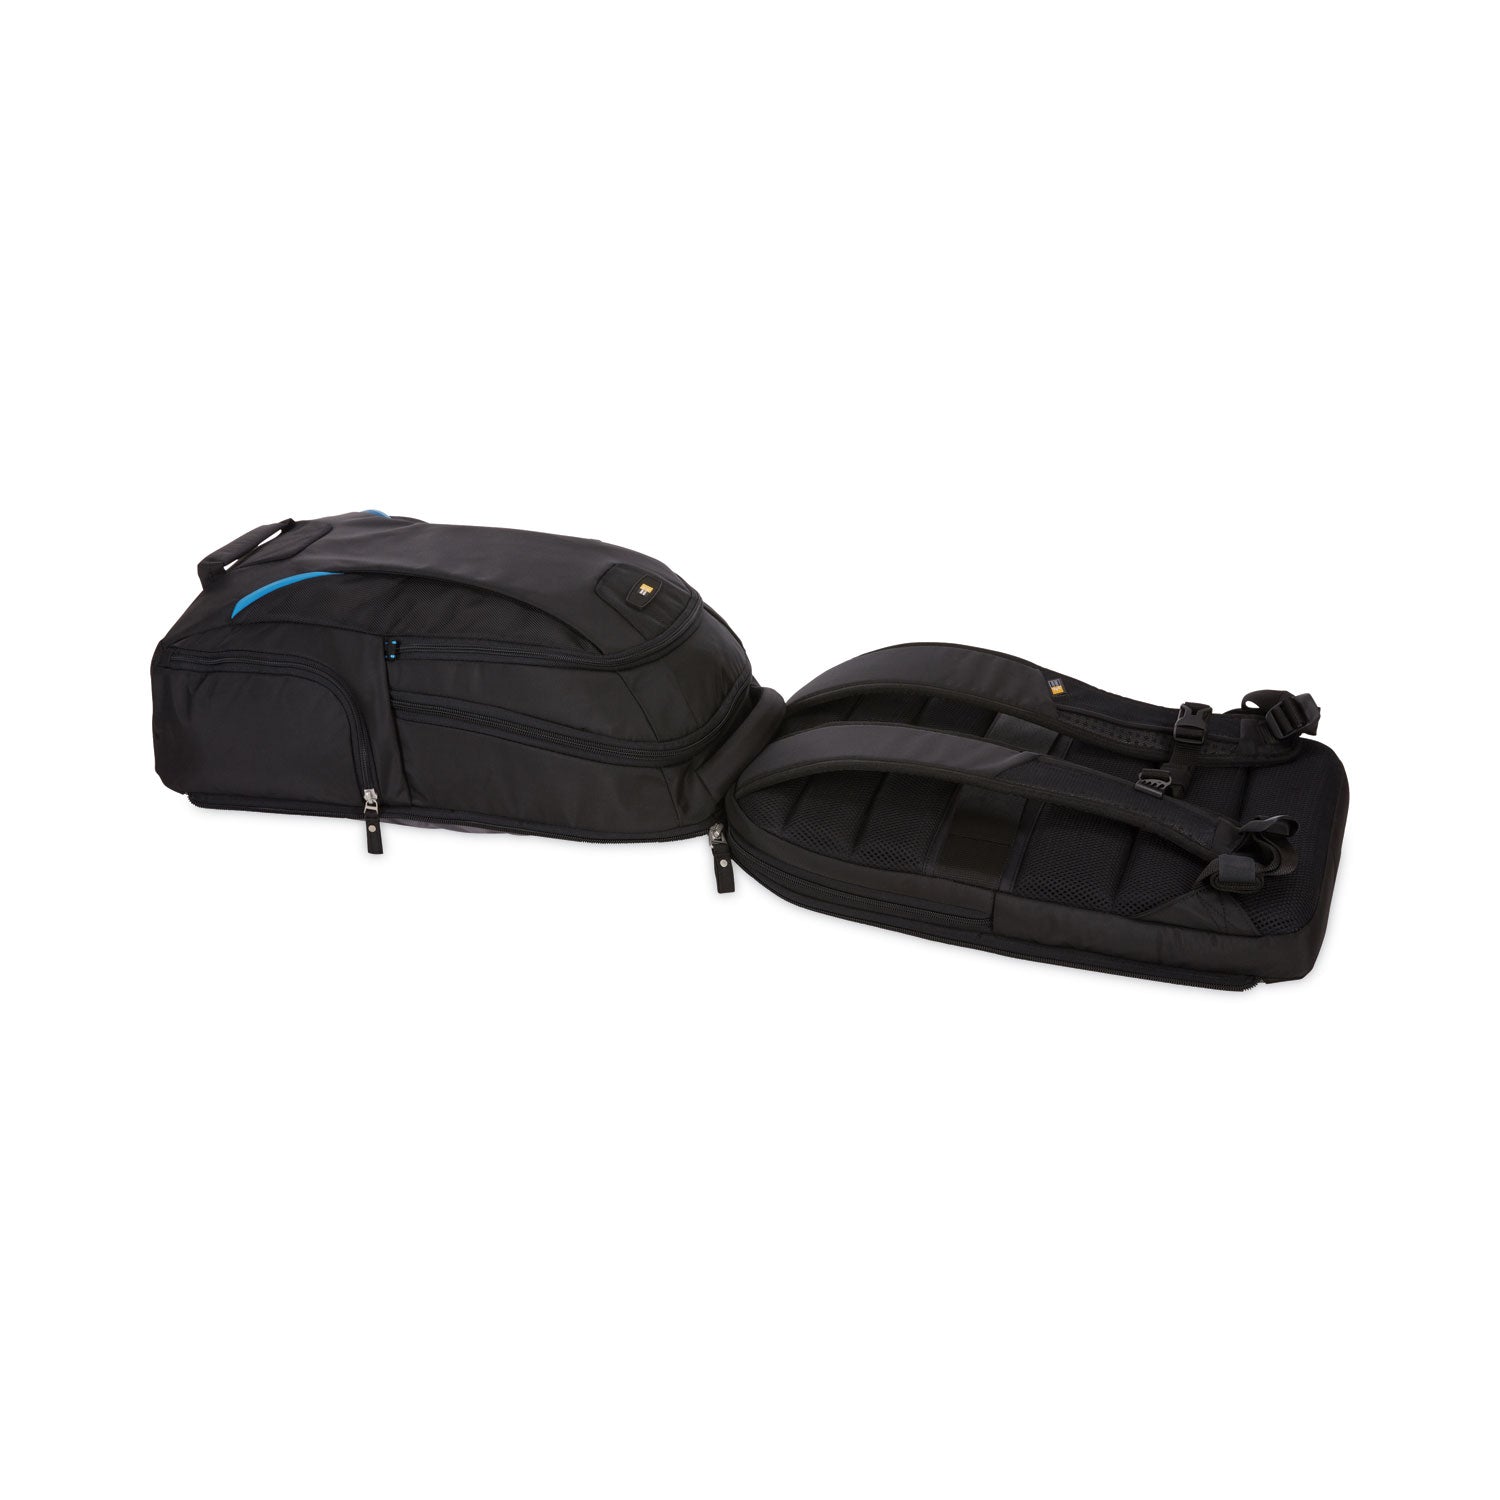 checkpoint-friendly-backpack-fits-devices-up-to-156-polyester-276-x-1339-x-1969-black_clg3203772 - 6